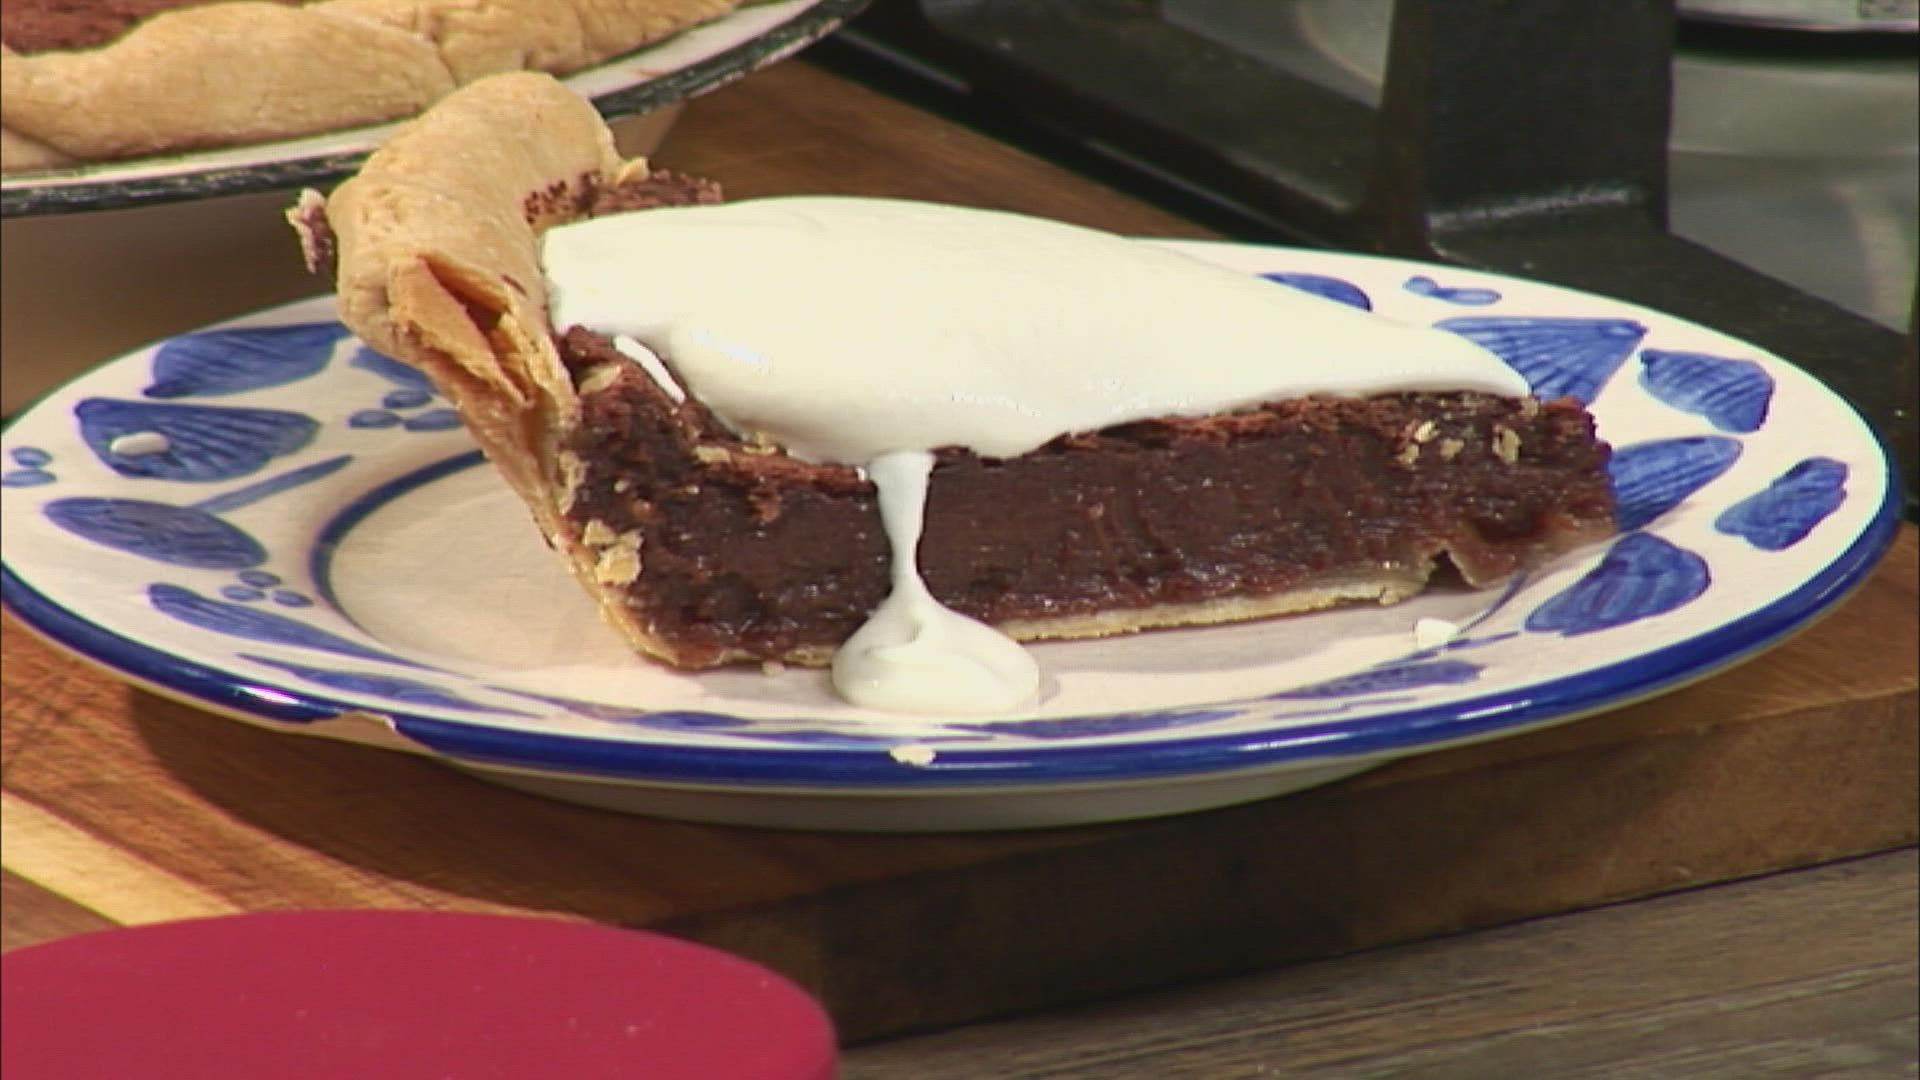 Chef Lynn Archer shows us how to make a dessert that’s perfect for cookouts.